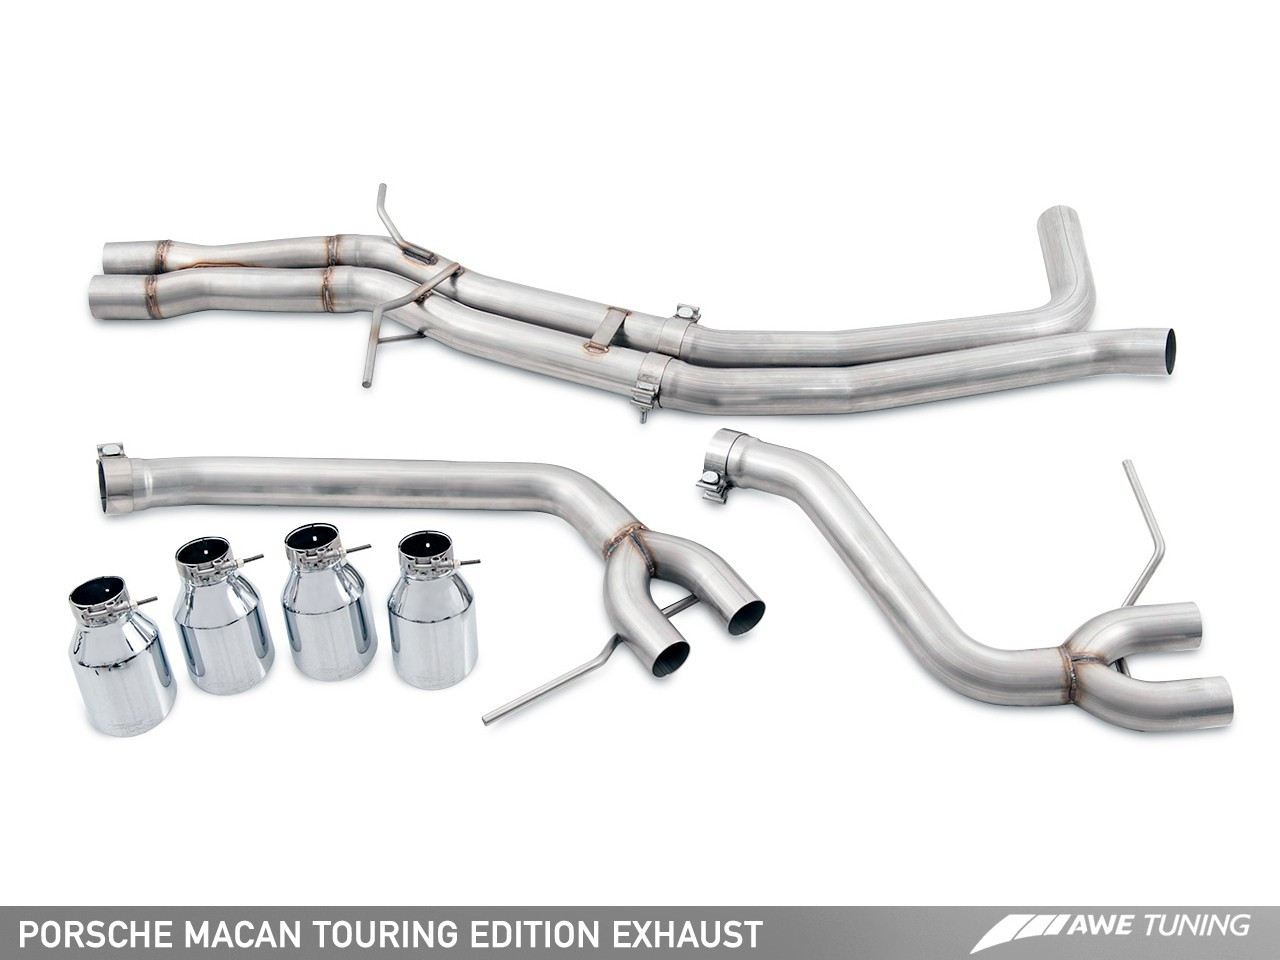 AWE Tuning Porsche Macan S and GTS Touring Edition Exhaust